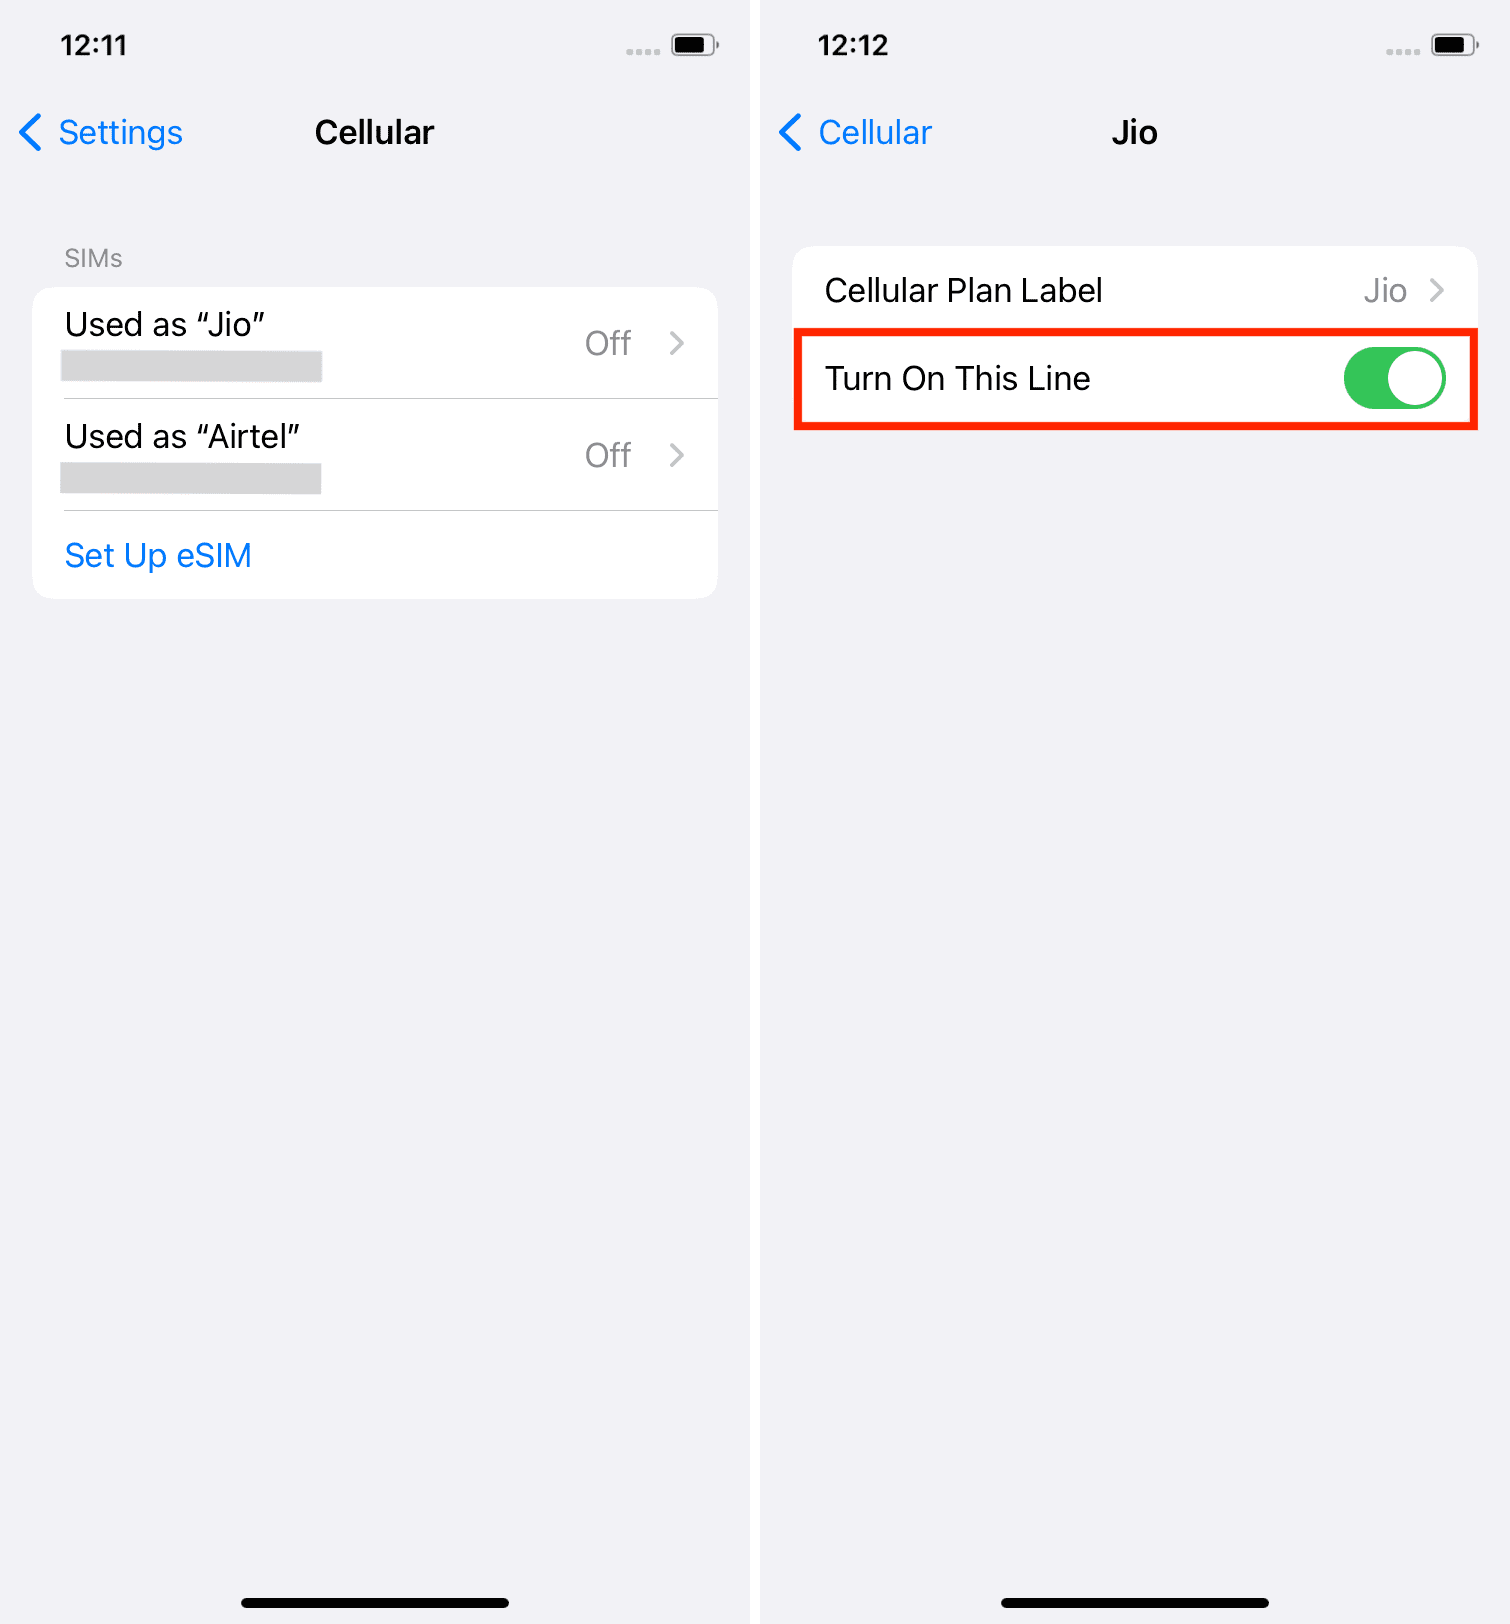 Turn On This Line in iPhone cellular settings